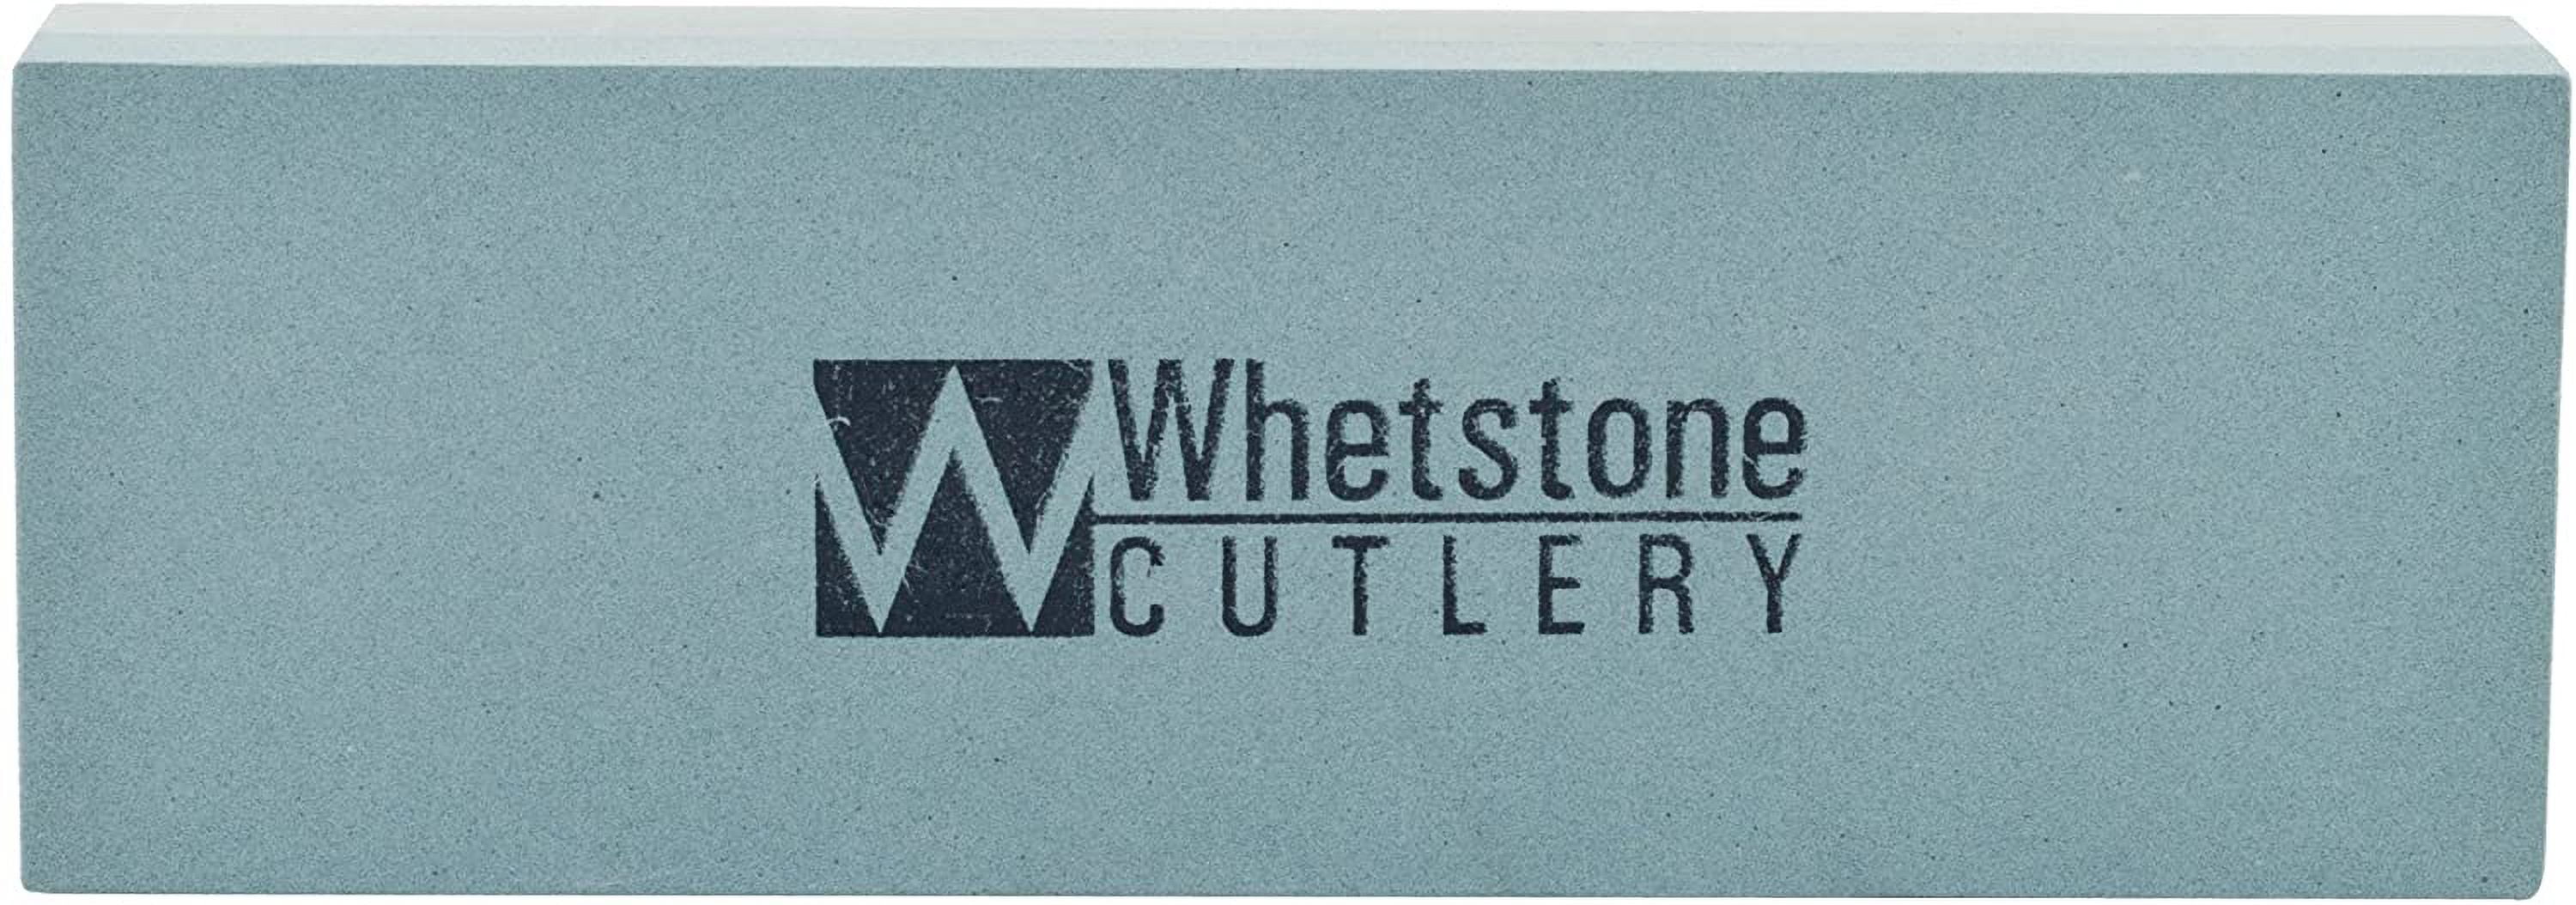 Knife Sharpening Stone 2-Pack - Dual 400/1000 Grit Wet Block - Sharpens and  Polishes Sharp Tools and Kitchen or Hunting Knives by Whetstone